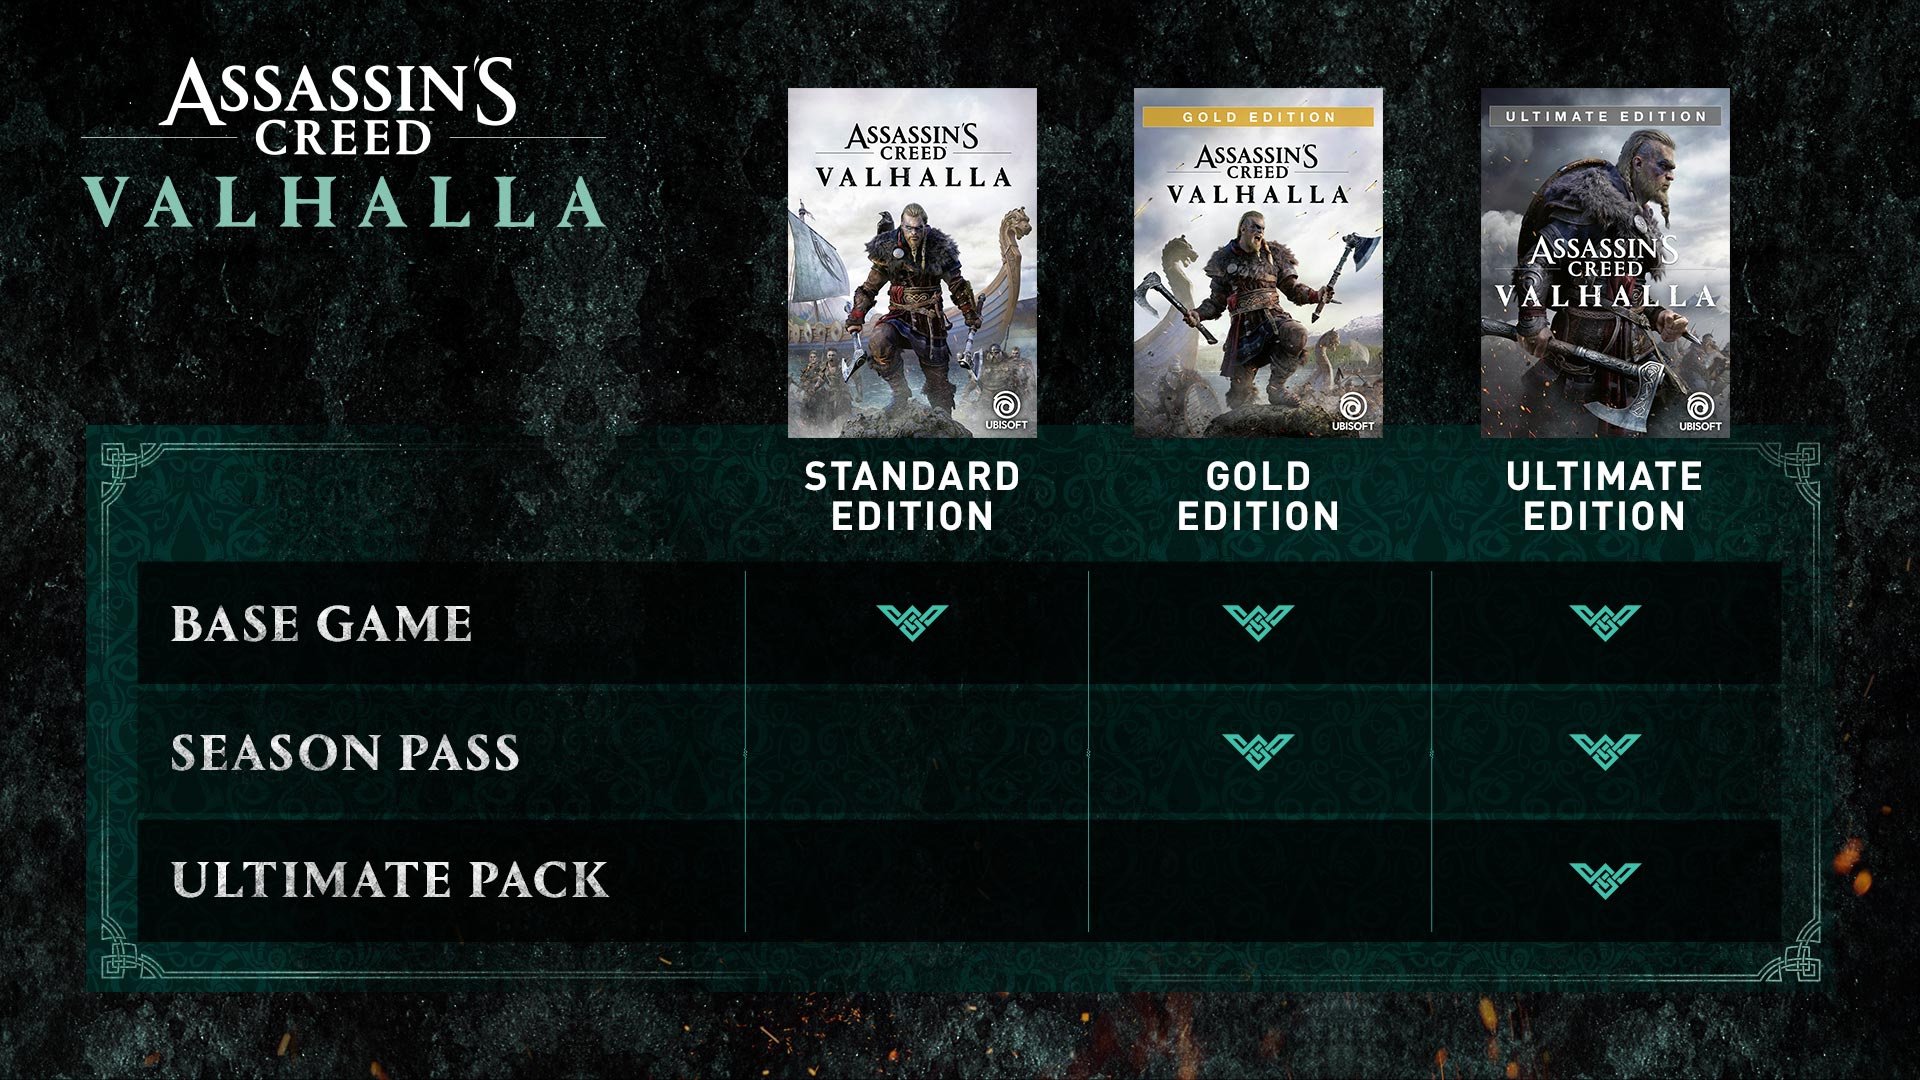 assassin-s-creed-valhalla-pre-order-info-and-retail-editions-detailed